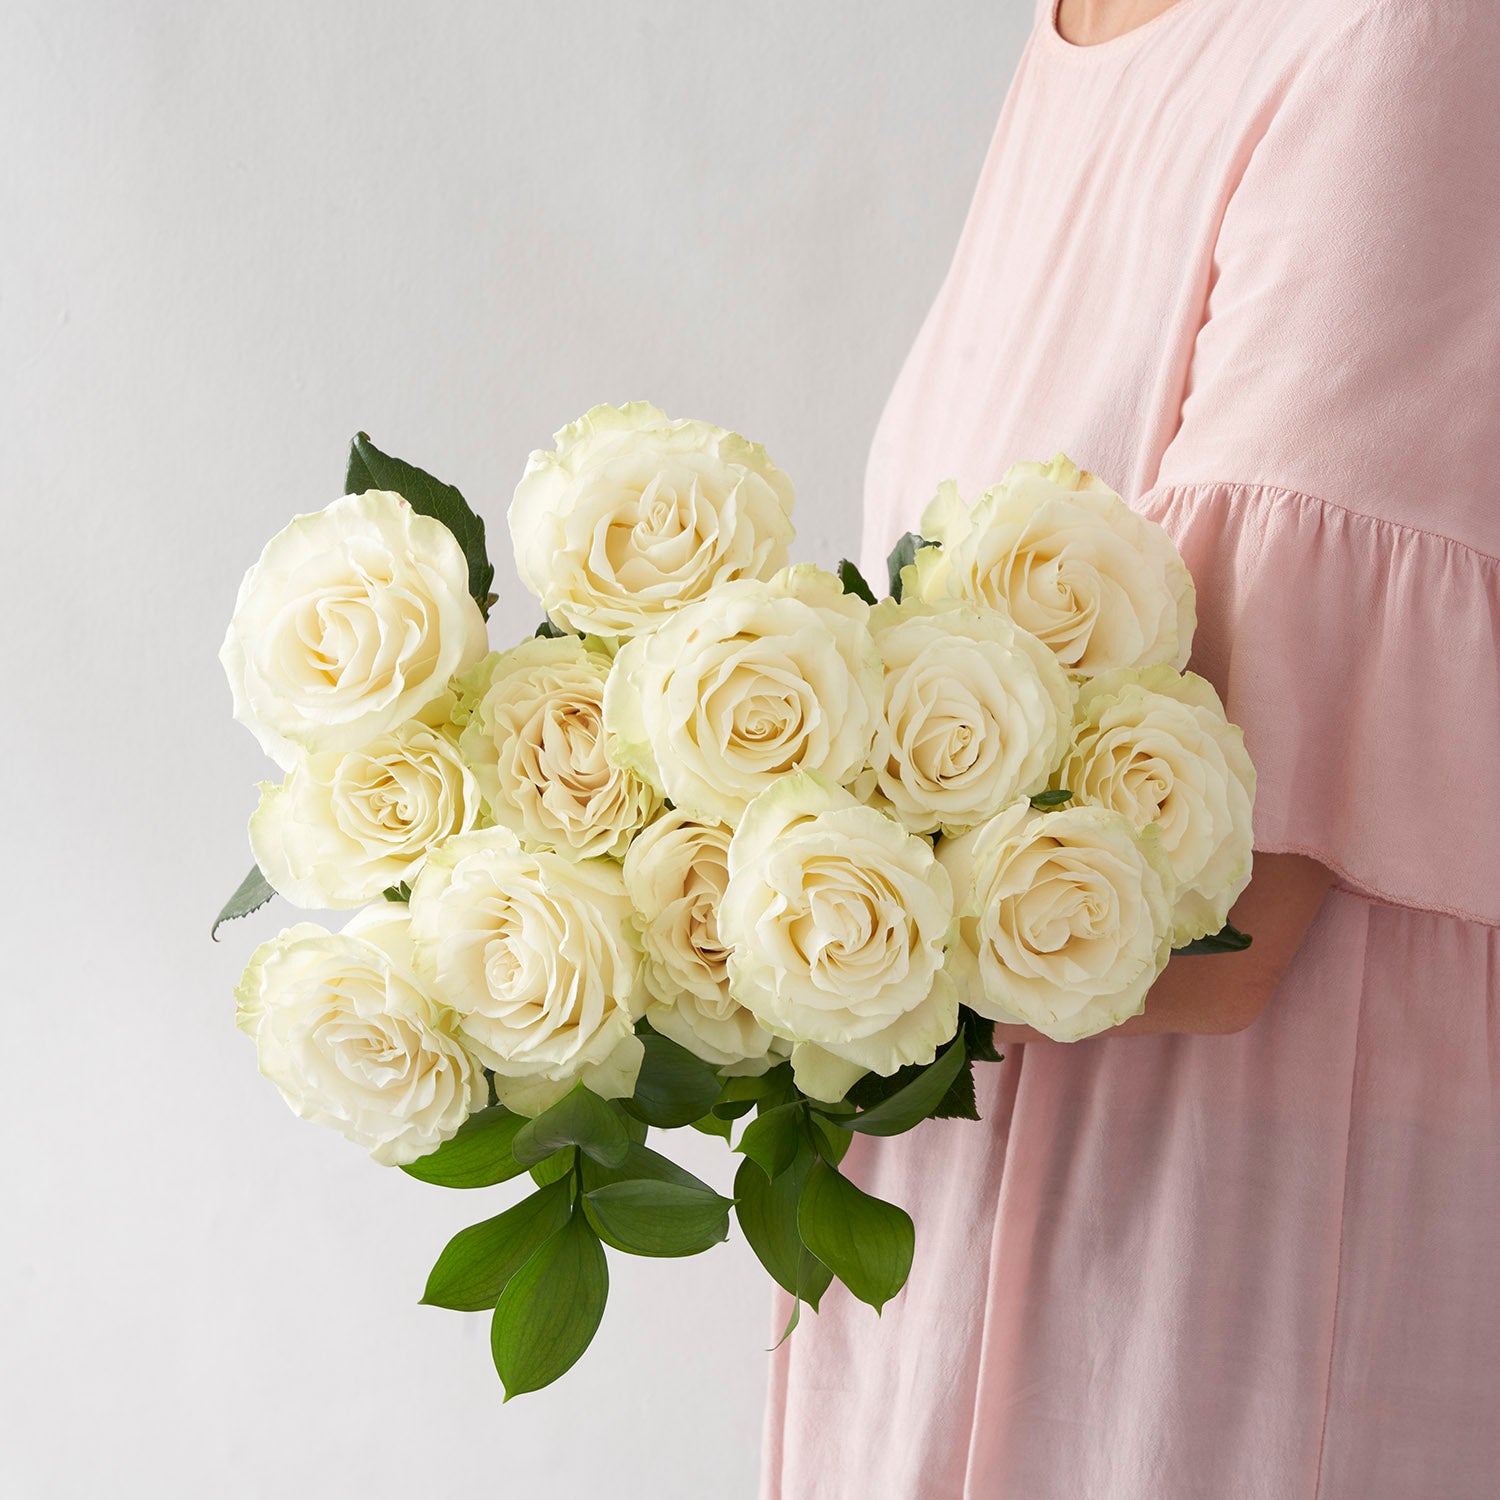 Woman in pale pink dress holding bouquet of white Mondial roses.